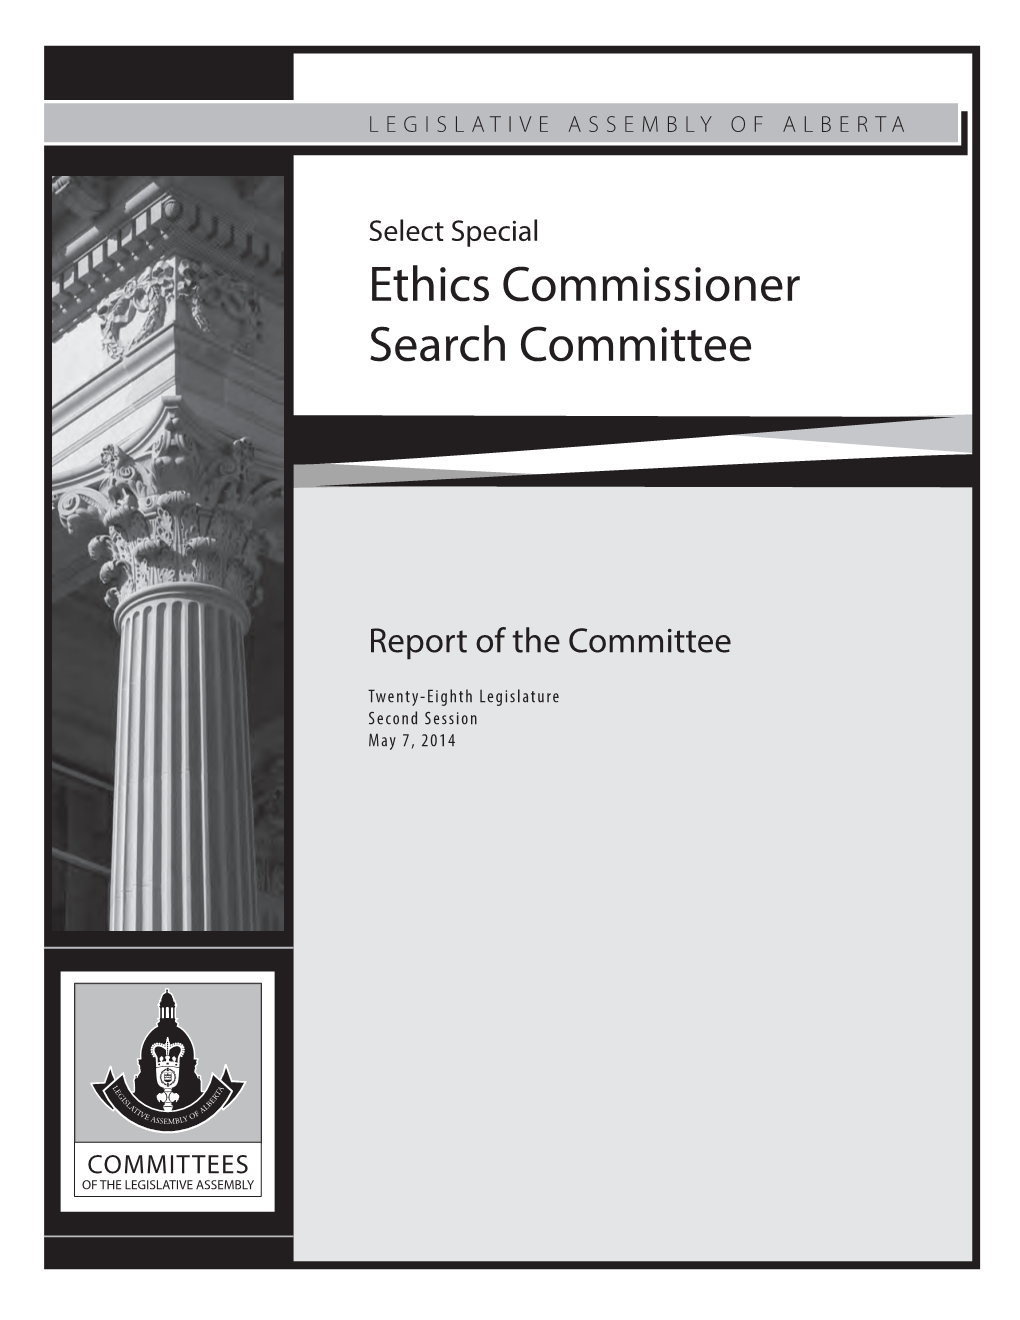 Ethics Commissioner Search Committee